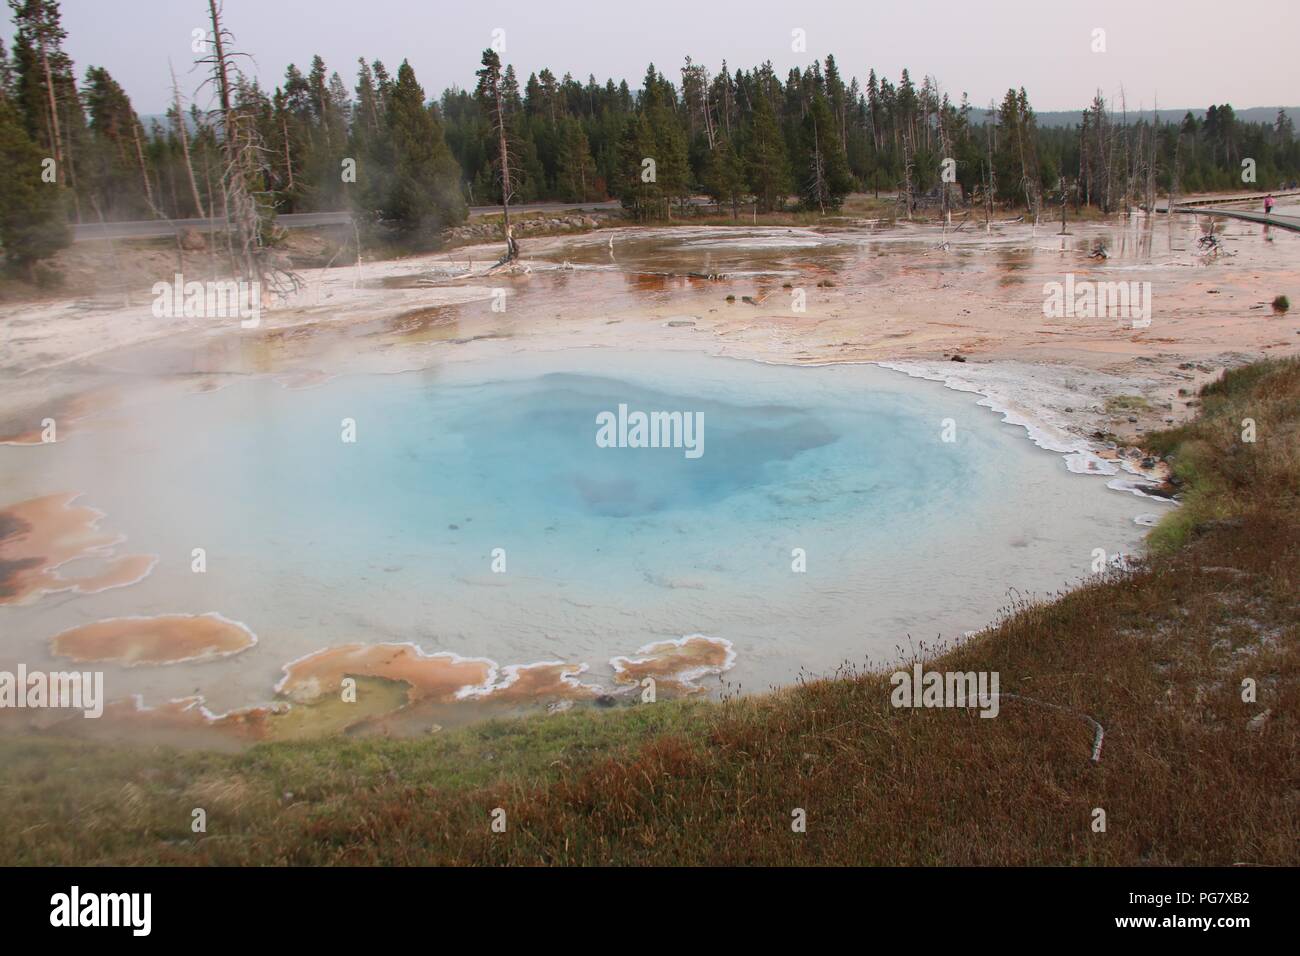 A hot spring at the Lower Geyser Basin in Yellowstone National Park, Wyoming Stock Photo